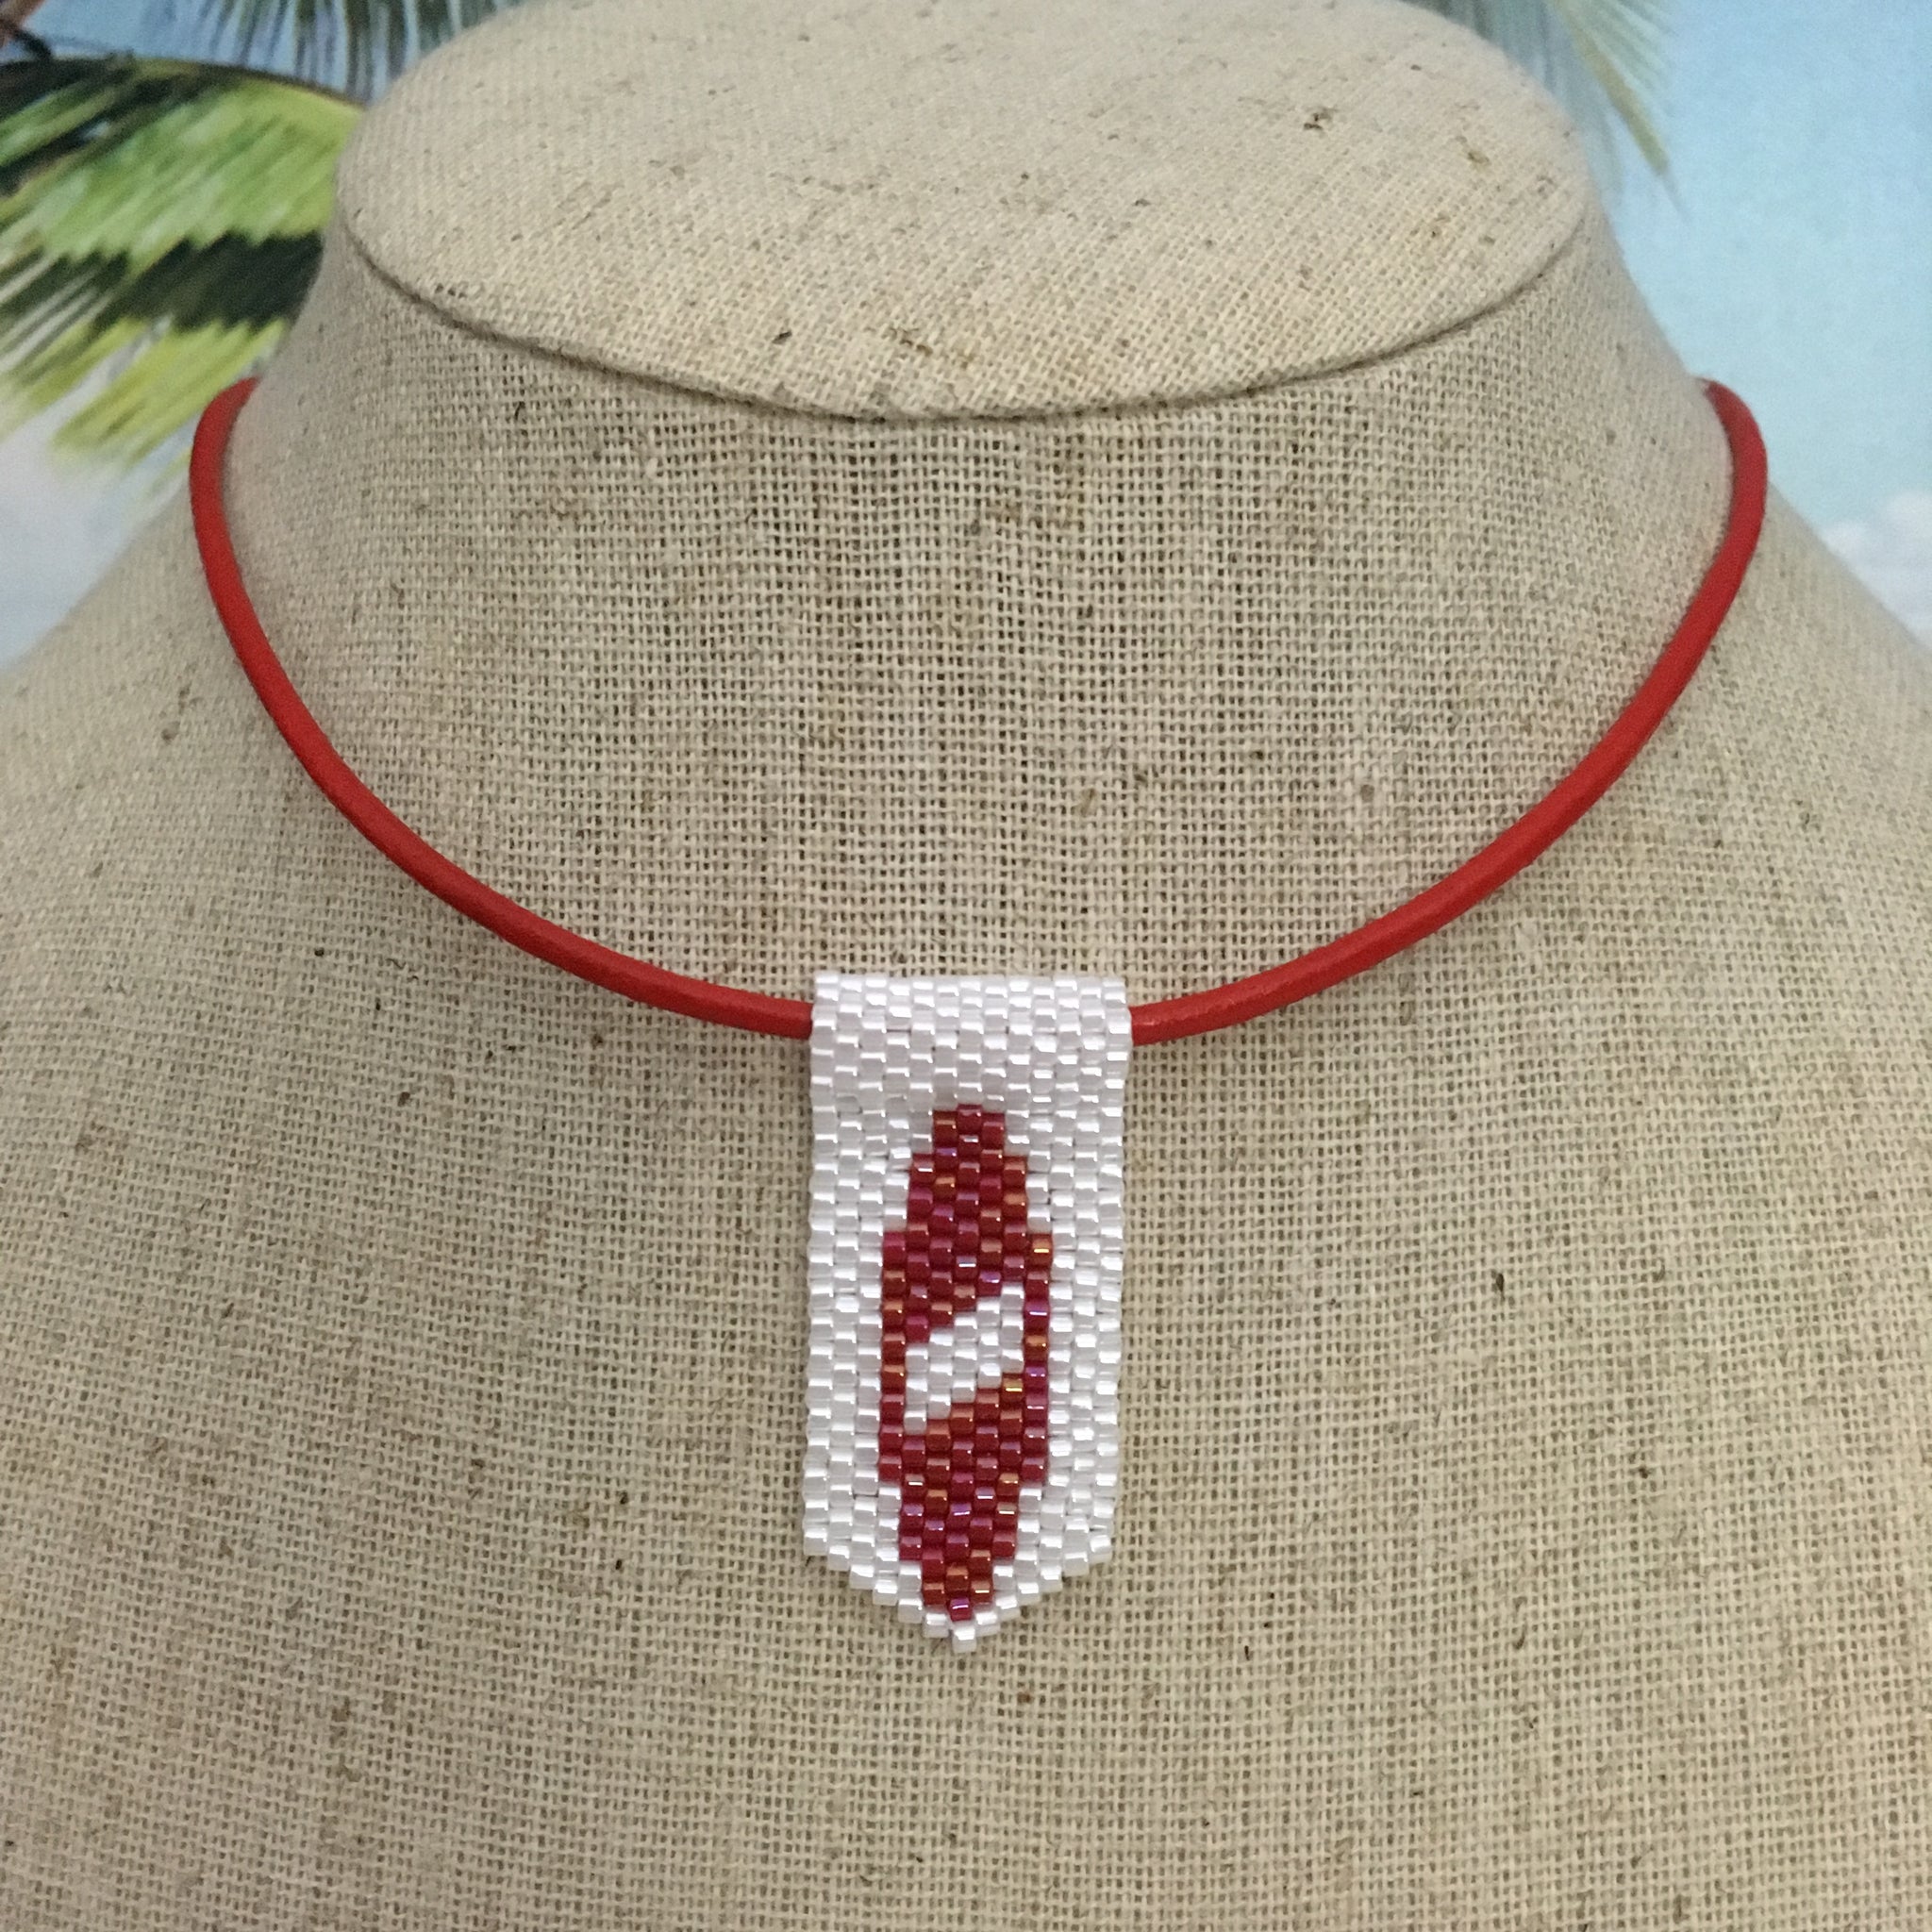 Handmade beaded mini surfboard pendant on leather cord red and white